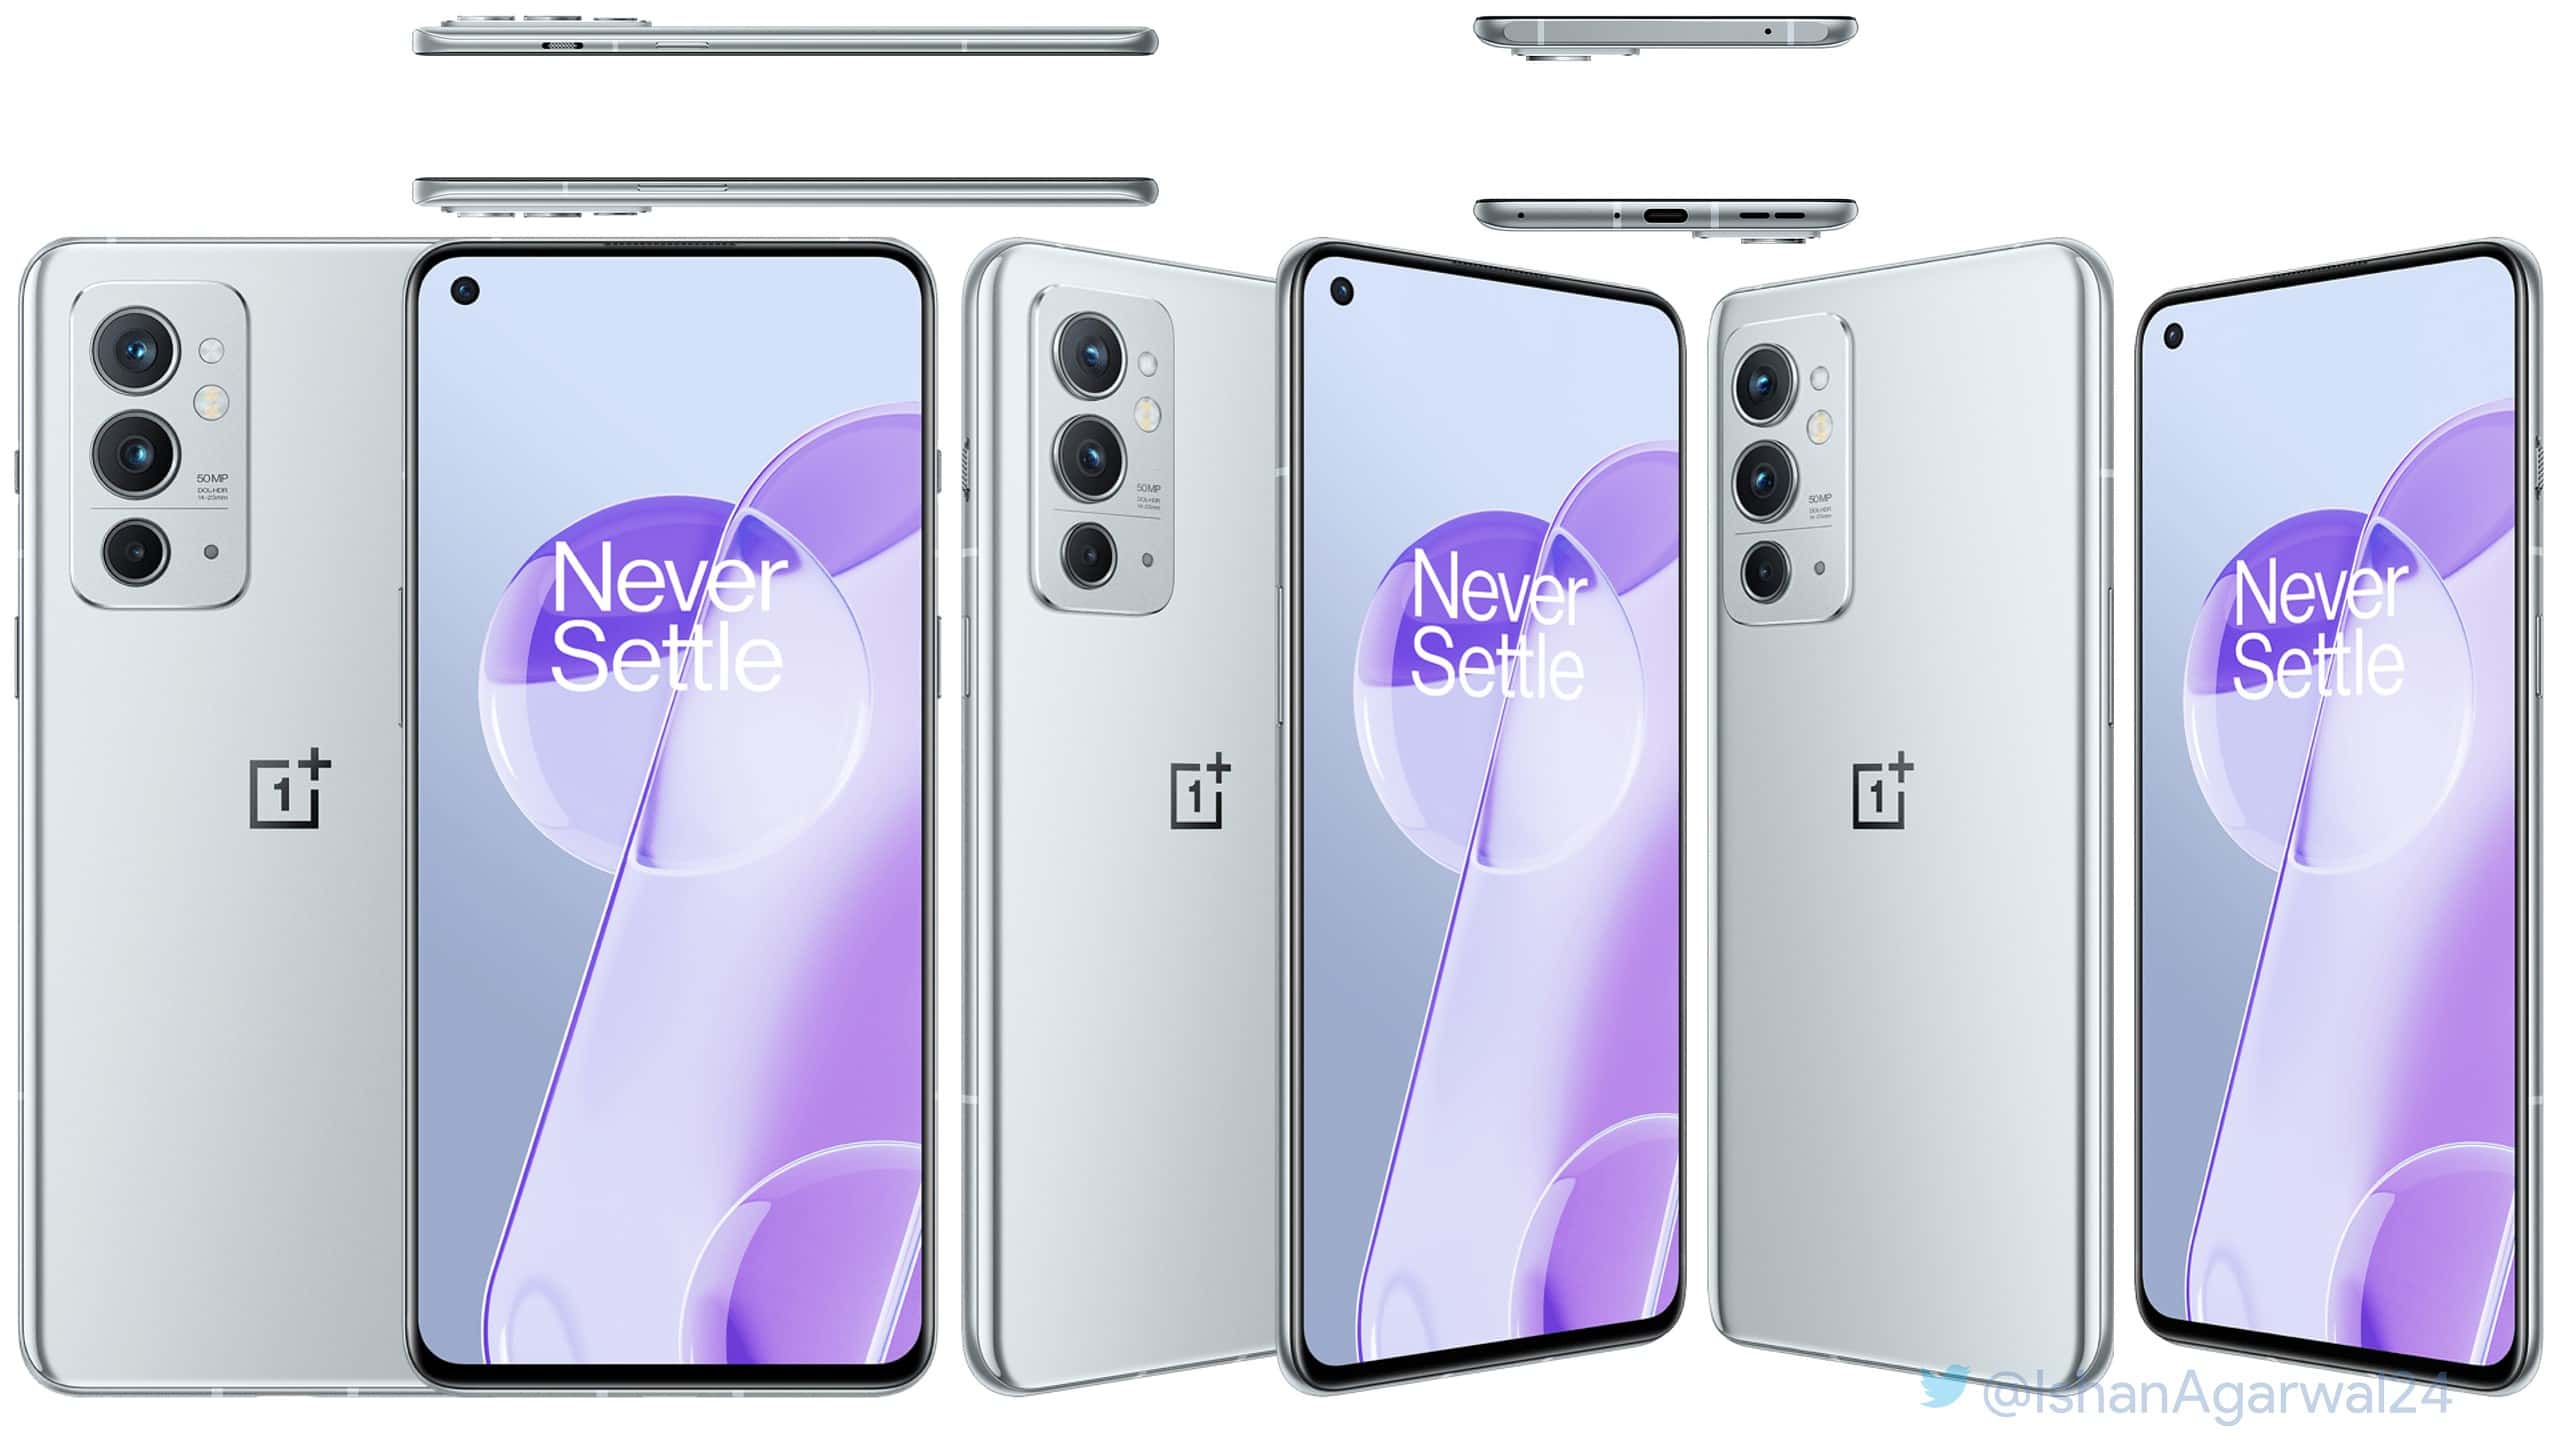 Confirmed: OnePlus 9 RT and OnePlus Buds Z2 will go official on October 13